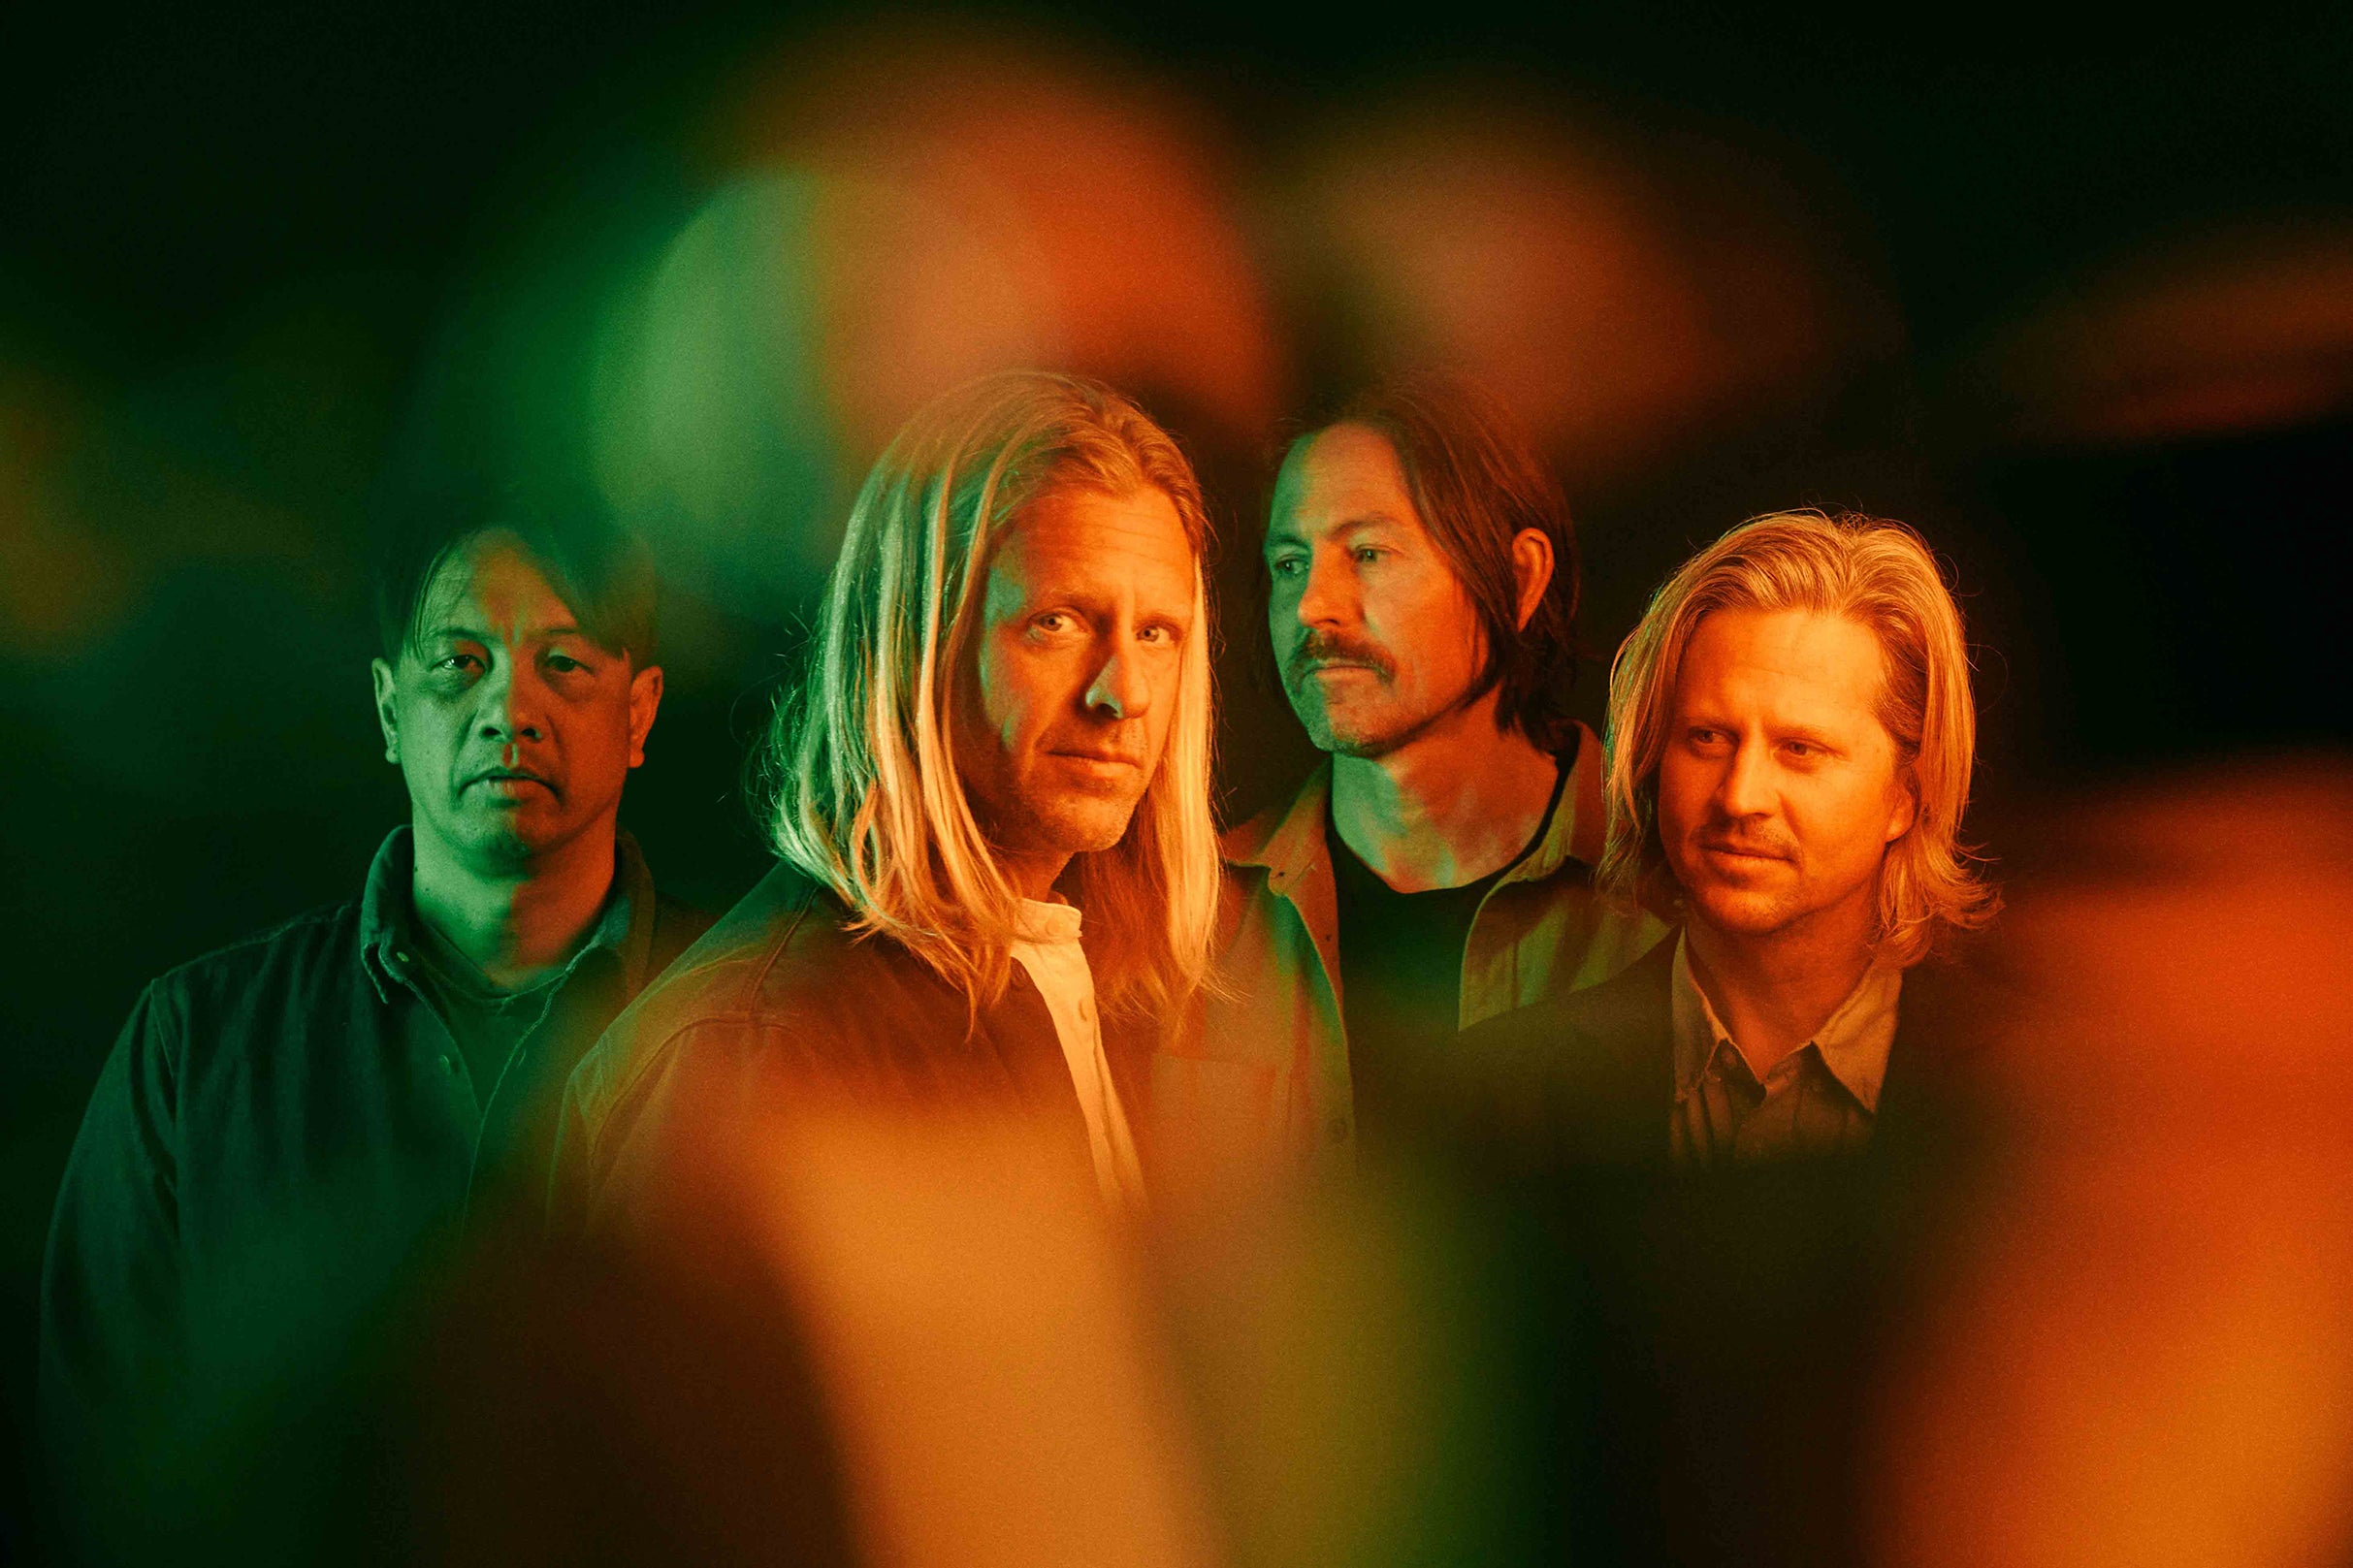 members only presale code for Switchfoot / Blue October / Matt Nathanson - Help From My Friends Tour advanced tickets in North Little Rock at Simmons Bank Arena